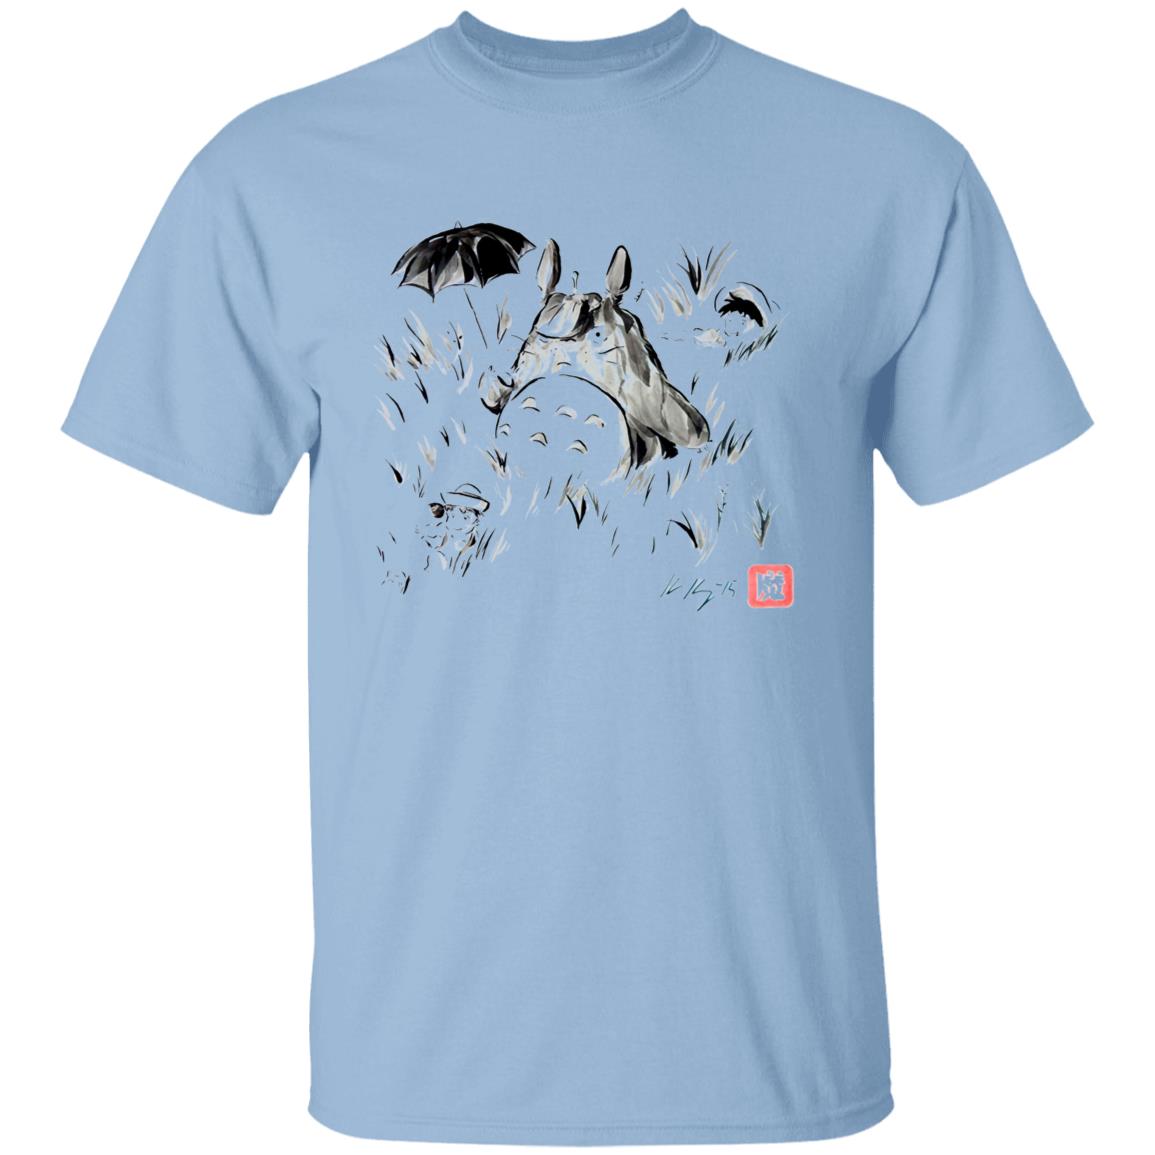 Totoro And The Girls Ink Painting T Shirt